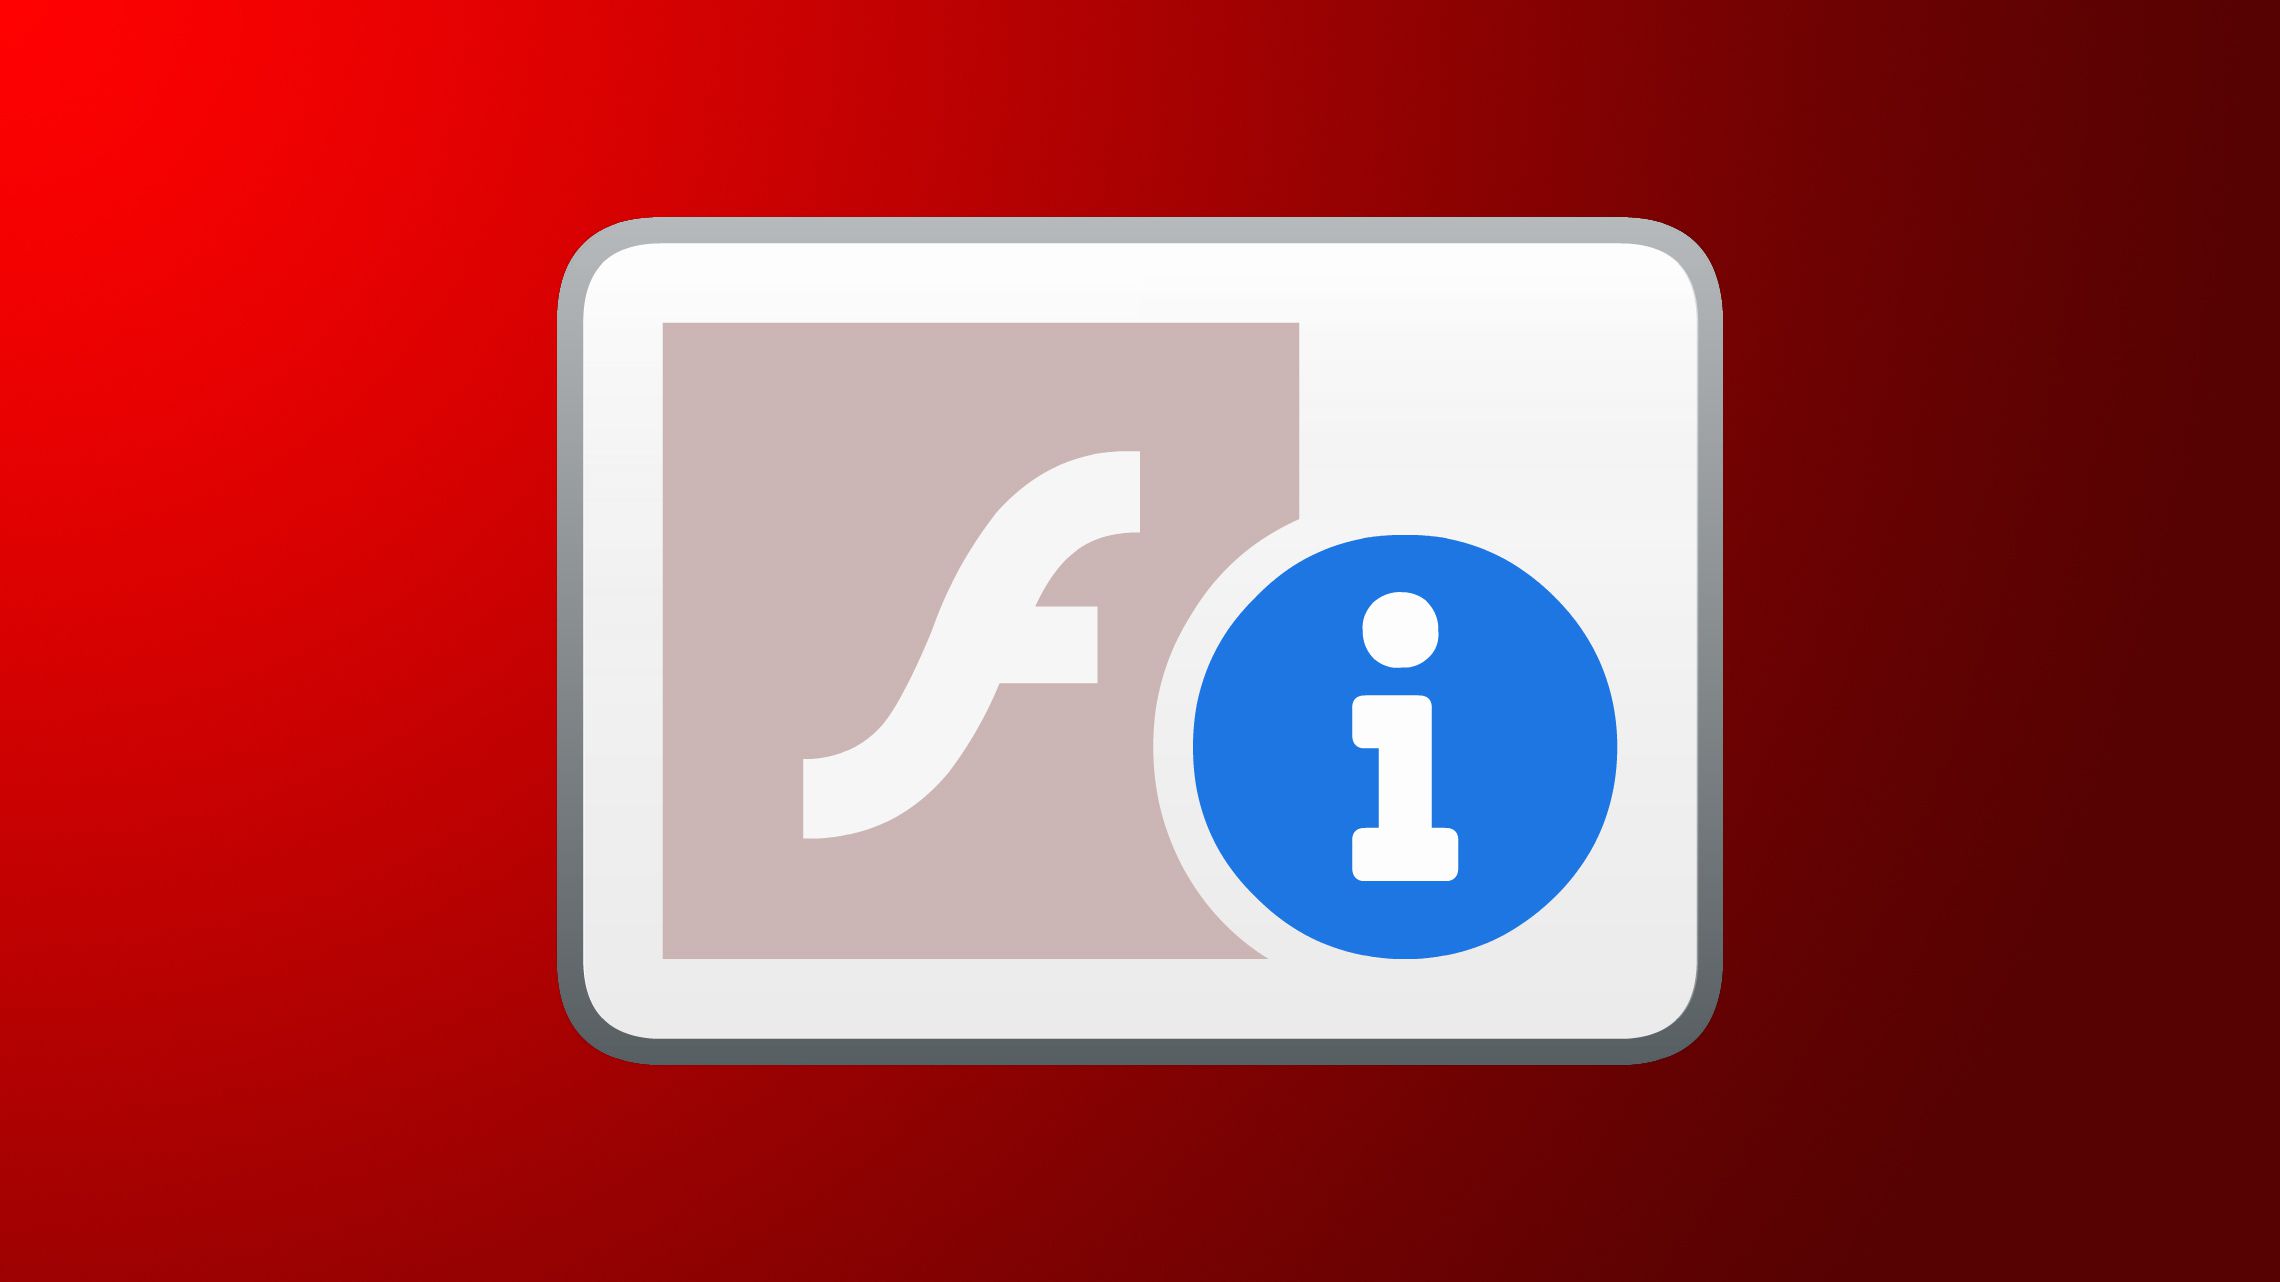 What is the alternative to adobe flash player